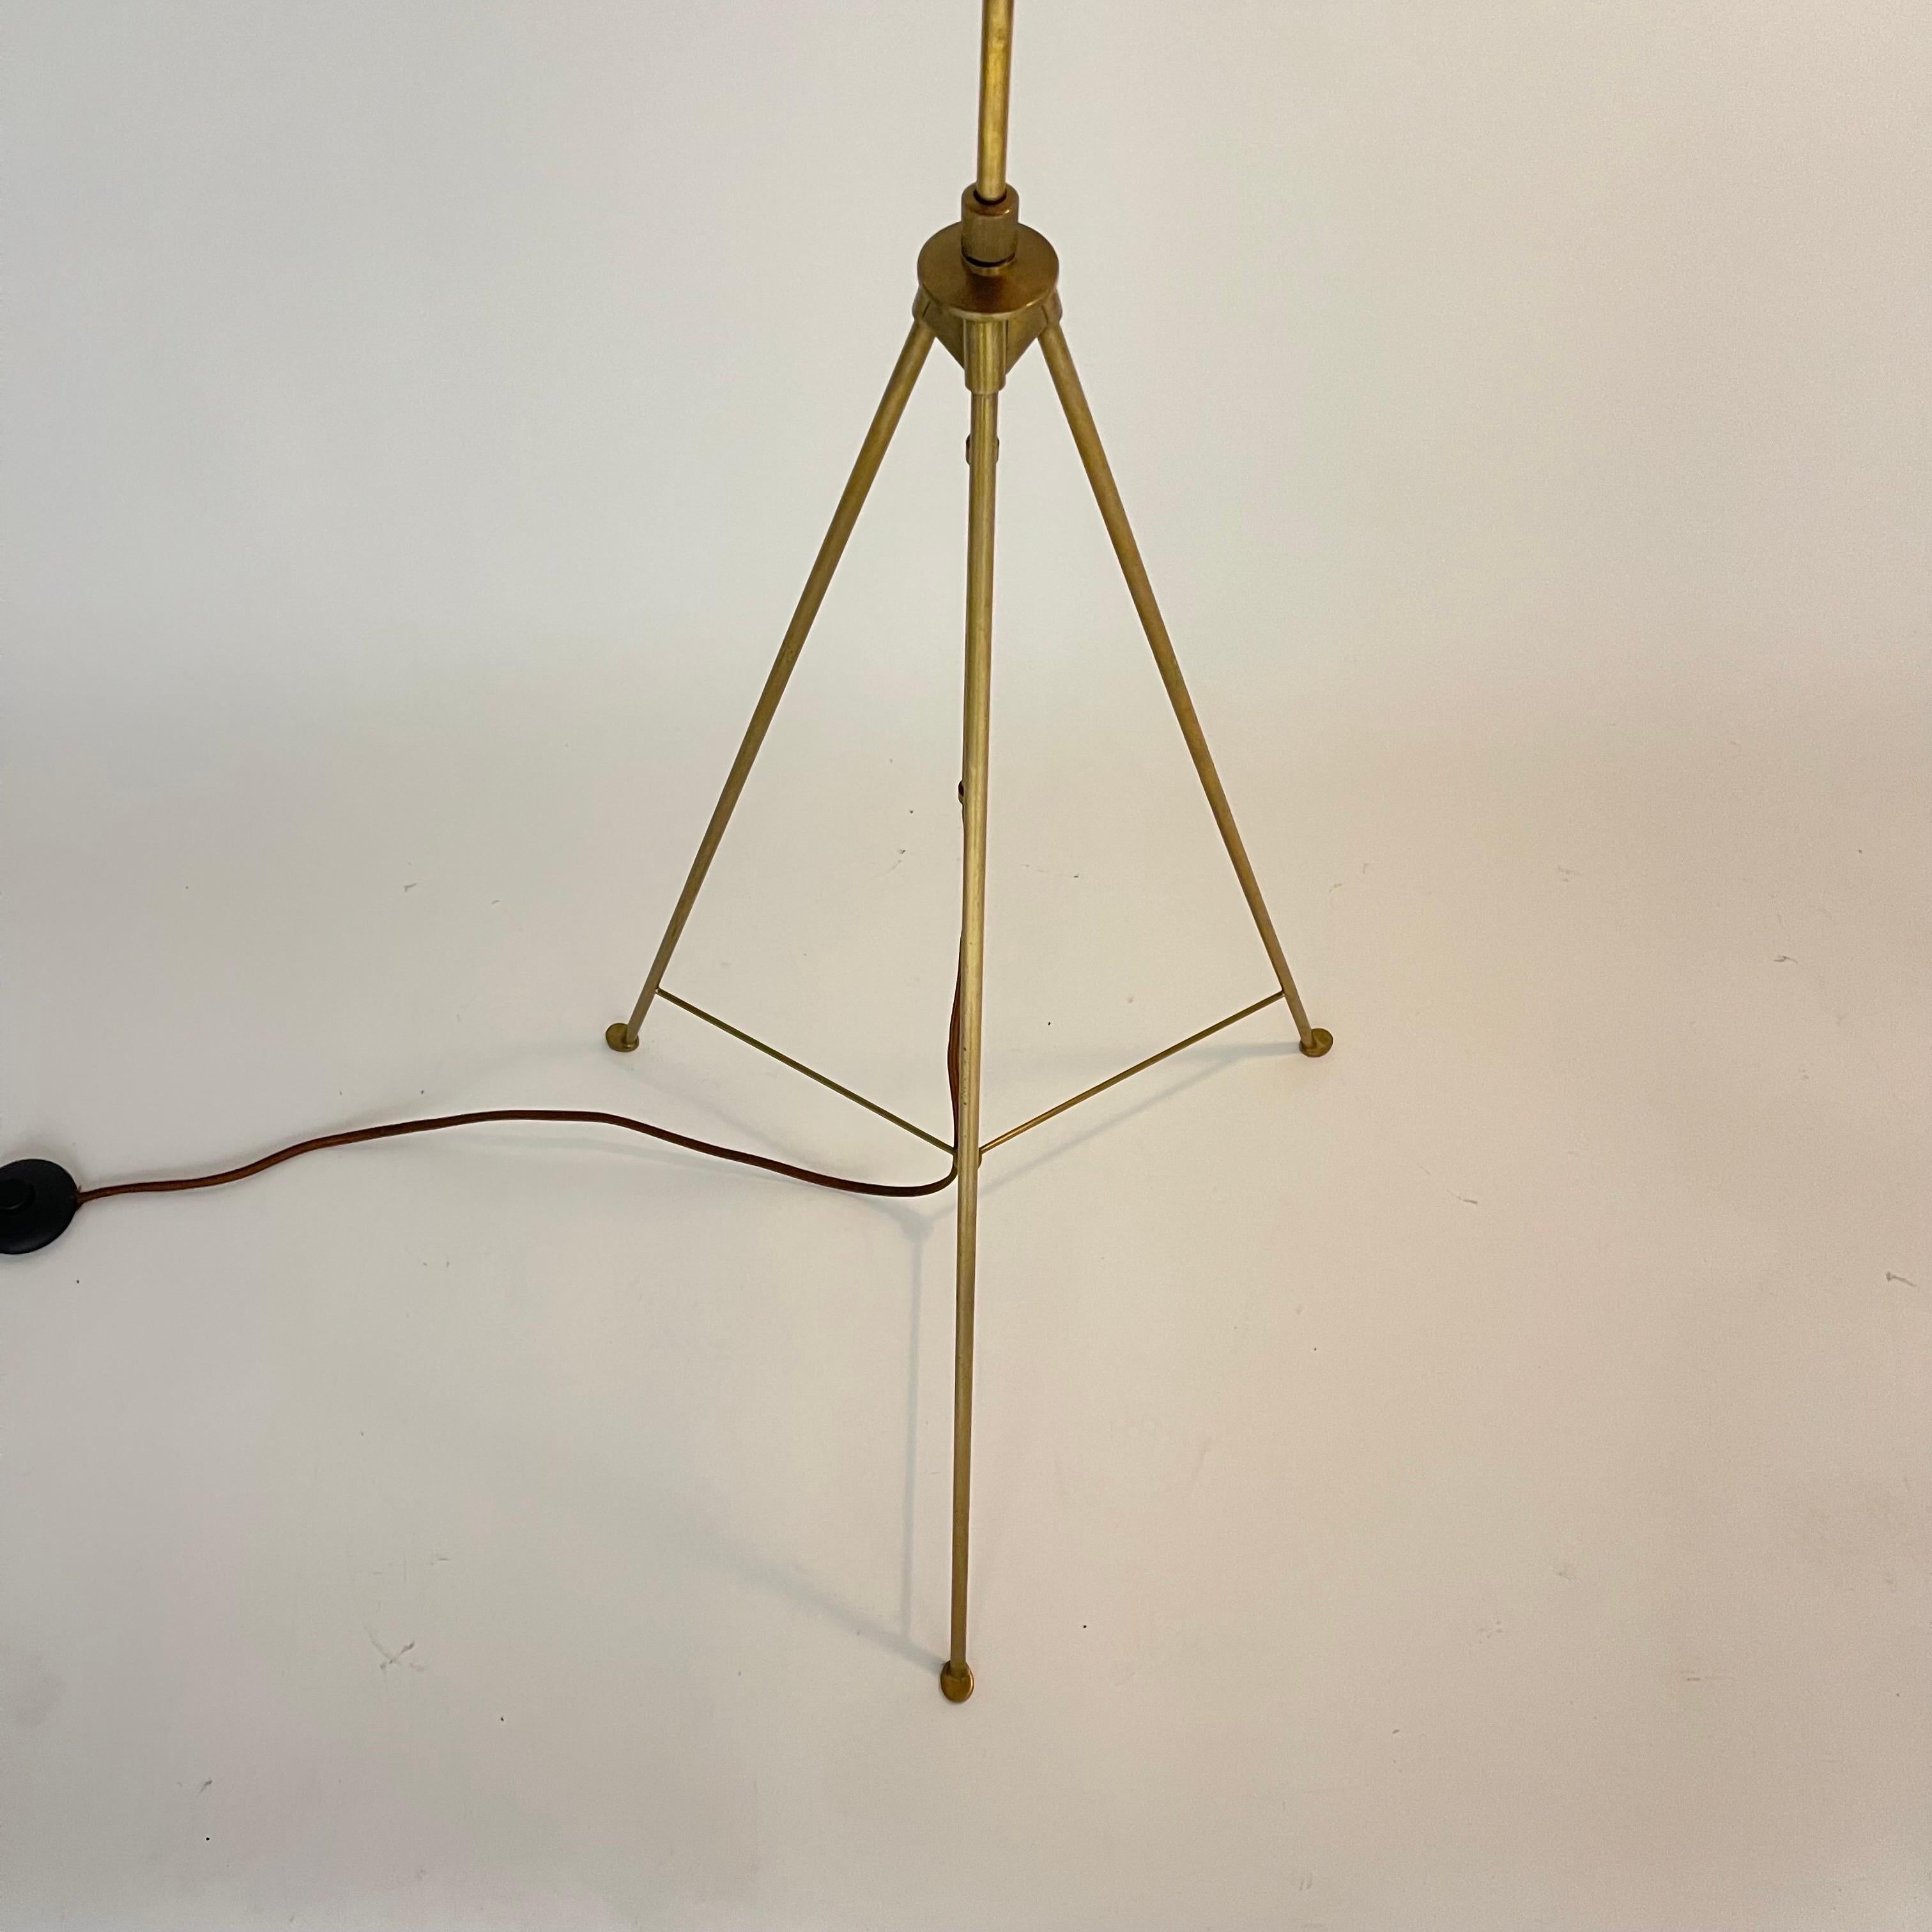 Kelly Wearstler Adjustable Bronze and White Enamel Floor Lamp, USA 2015 In Good Condition For Sale In Miami, FL